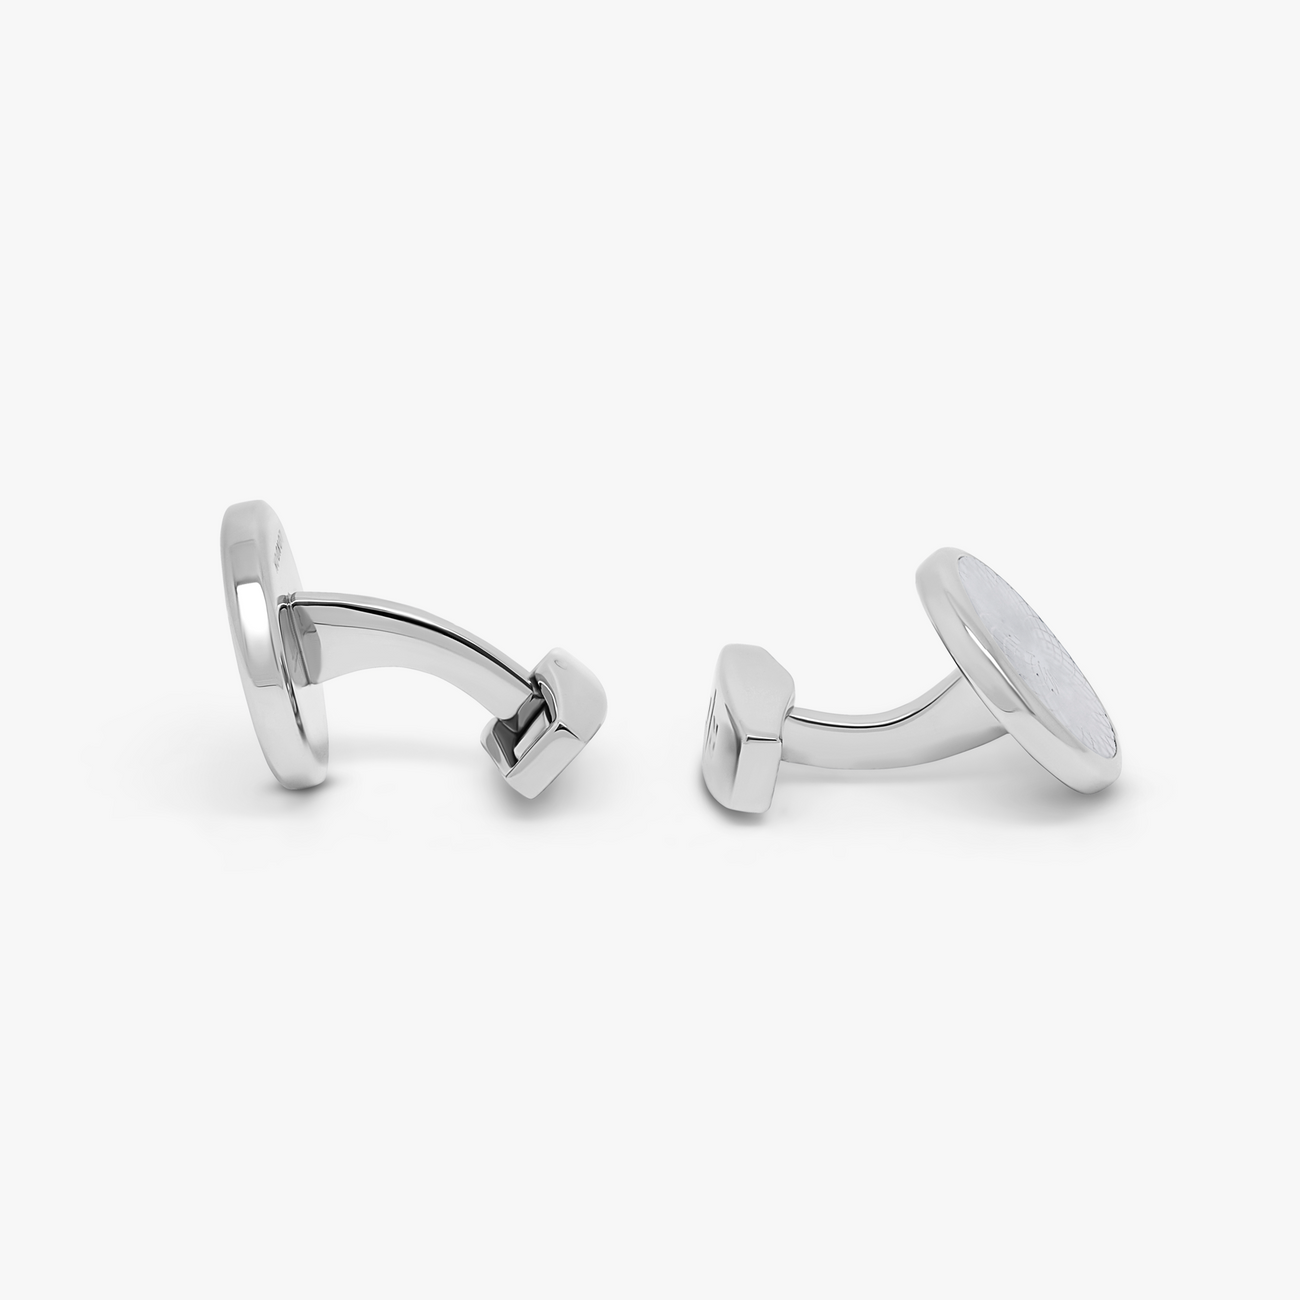 Rotondo Guilloche cufflinks with white mother of pearl in stainless steel